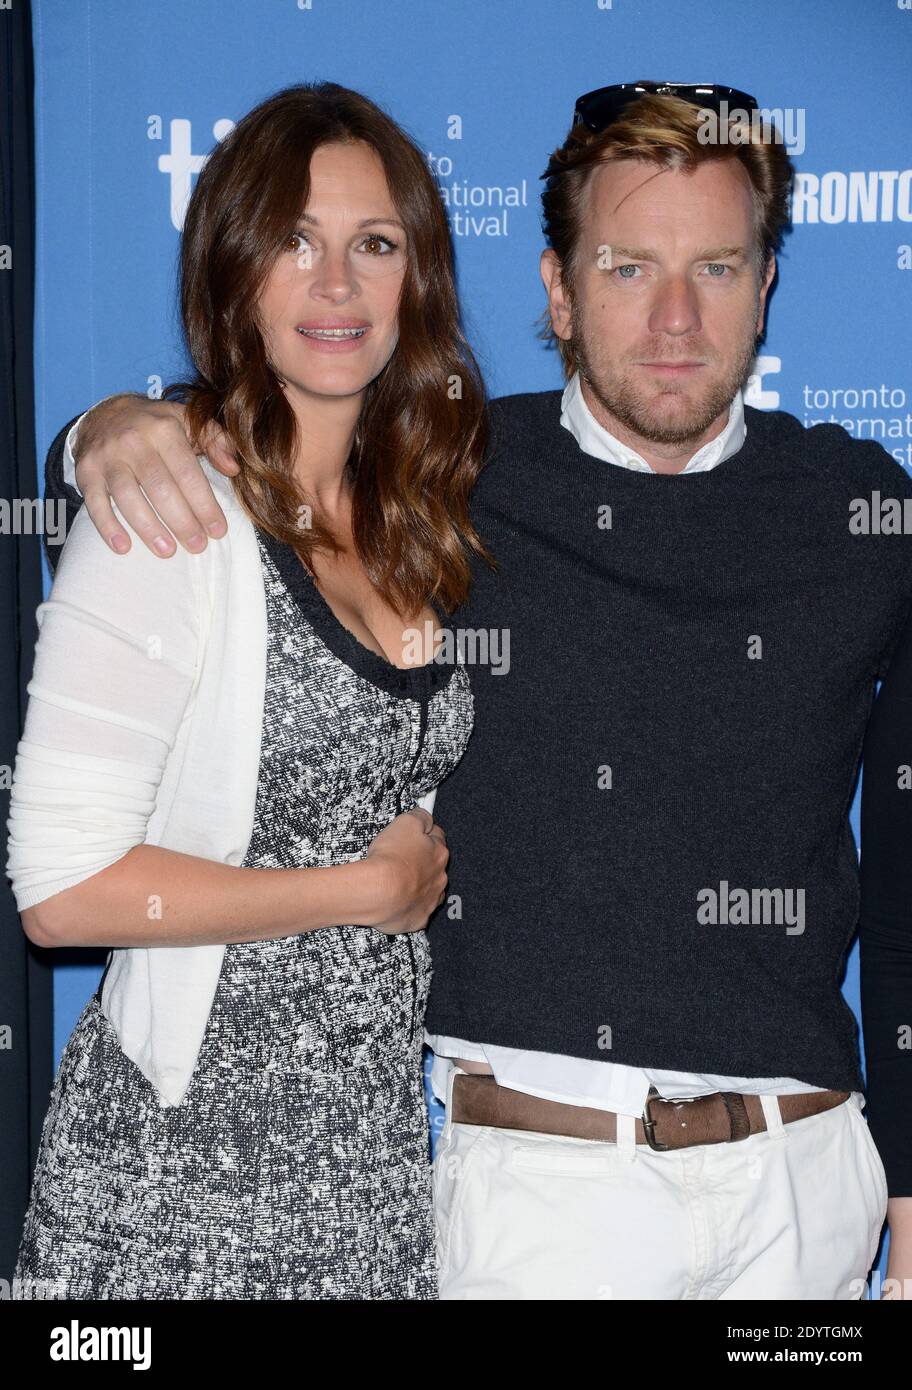 Julia Roberts and Ewan McGregor attend The August Osage County photocall at the 2013 Toronto International Film Festival in Toronto, ON, Canada on September 10, 2013. Photo by Lionel Hahn/ABACAPRESS.COM Stock Photo